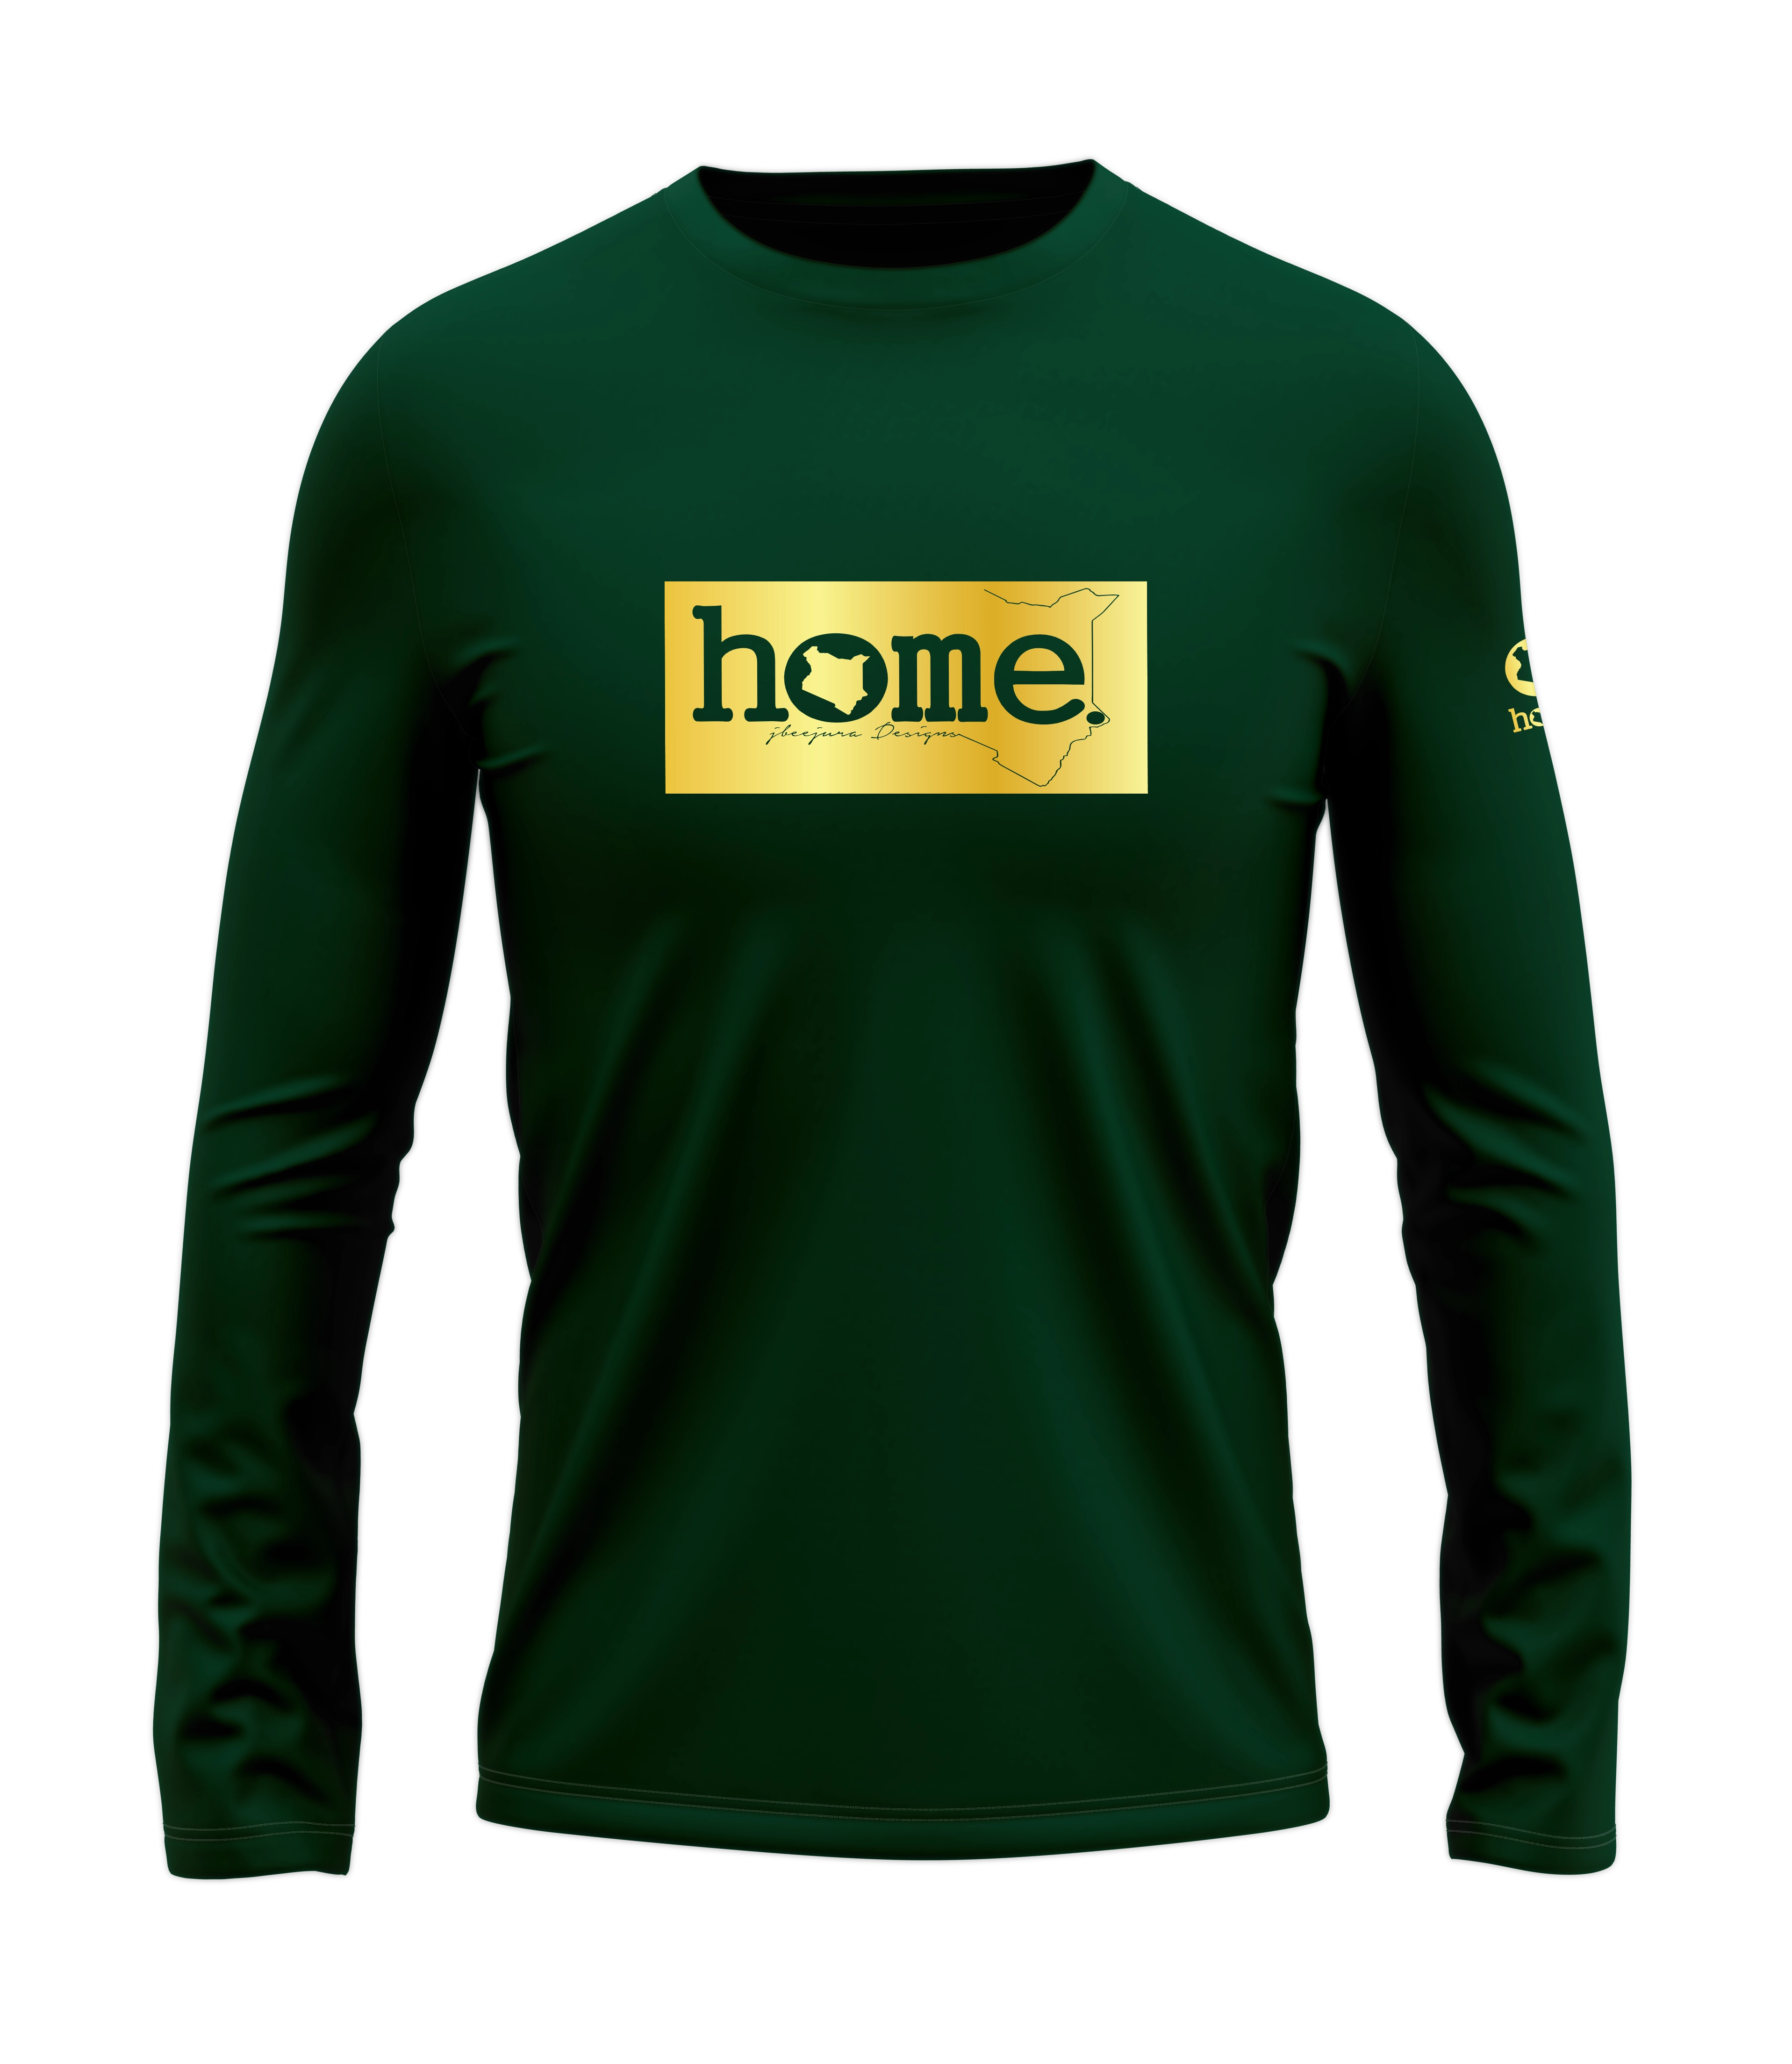 home_254 LONG-SLEEVED RICH GREEN T-SHIRT WITH A GOLD CLASSIC PRINT – COTTON PLUS FABRIC